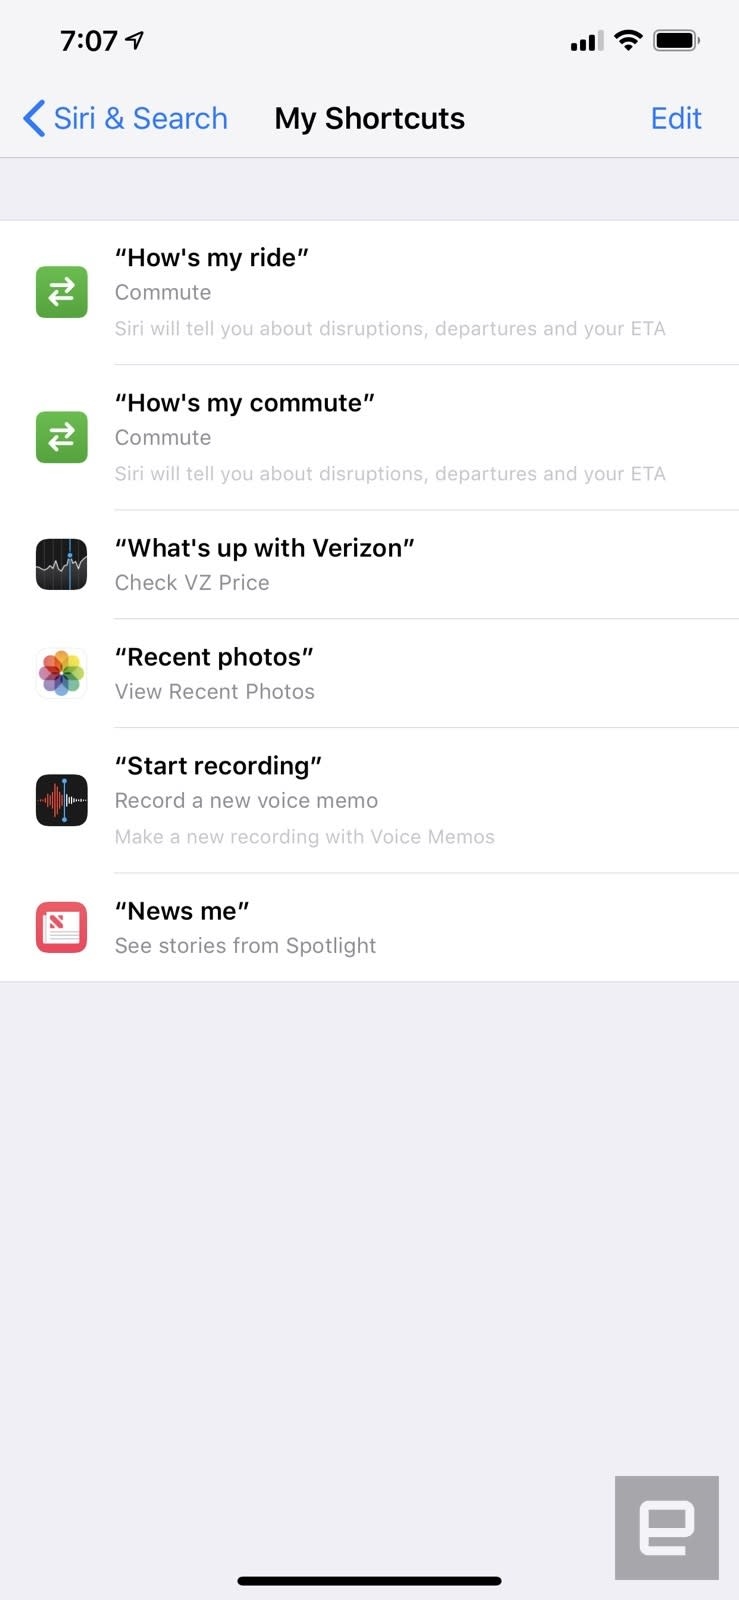 Apple releases rare iOS 12 update to address security flaw on older iPhones and iPads | DeviceDaily.com